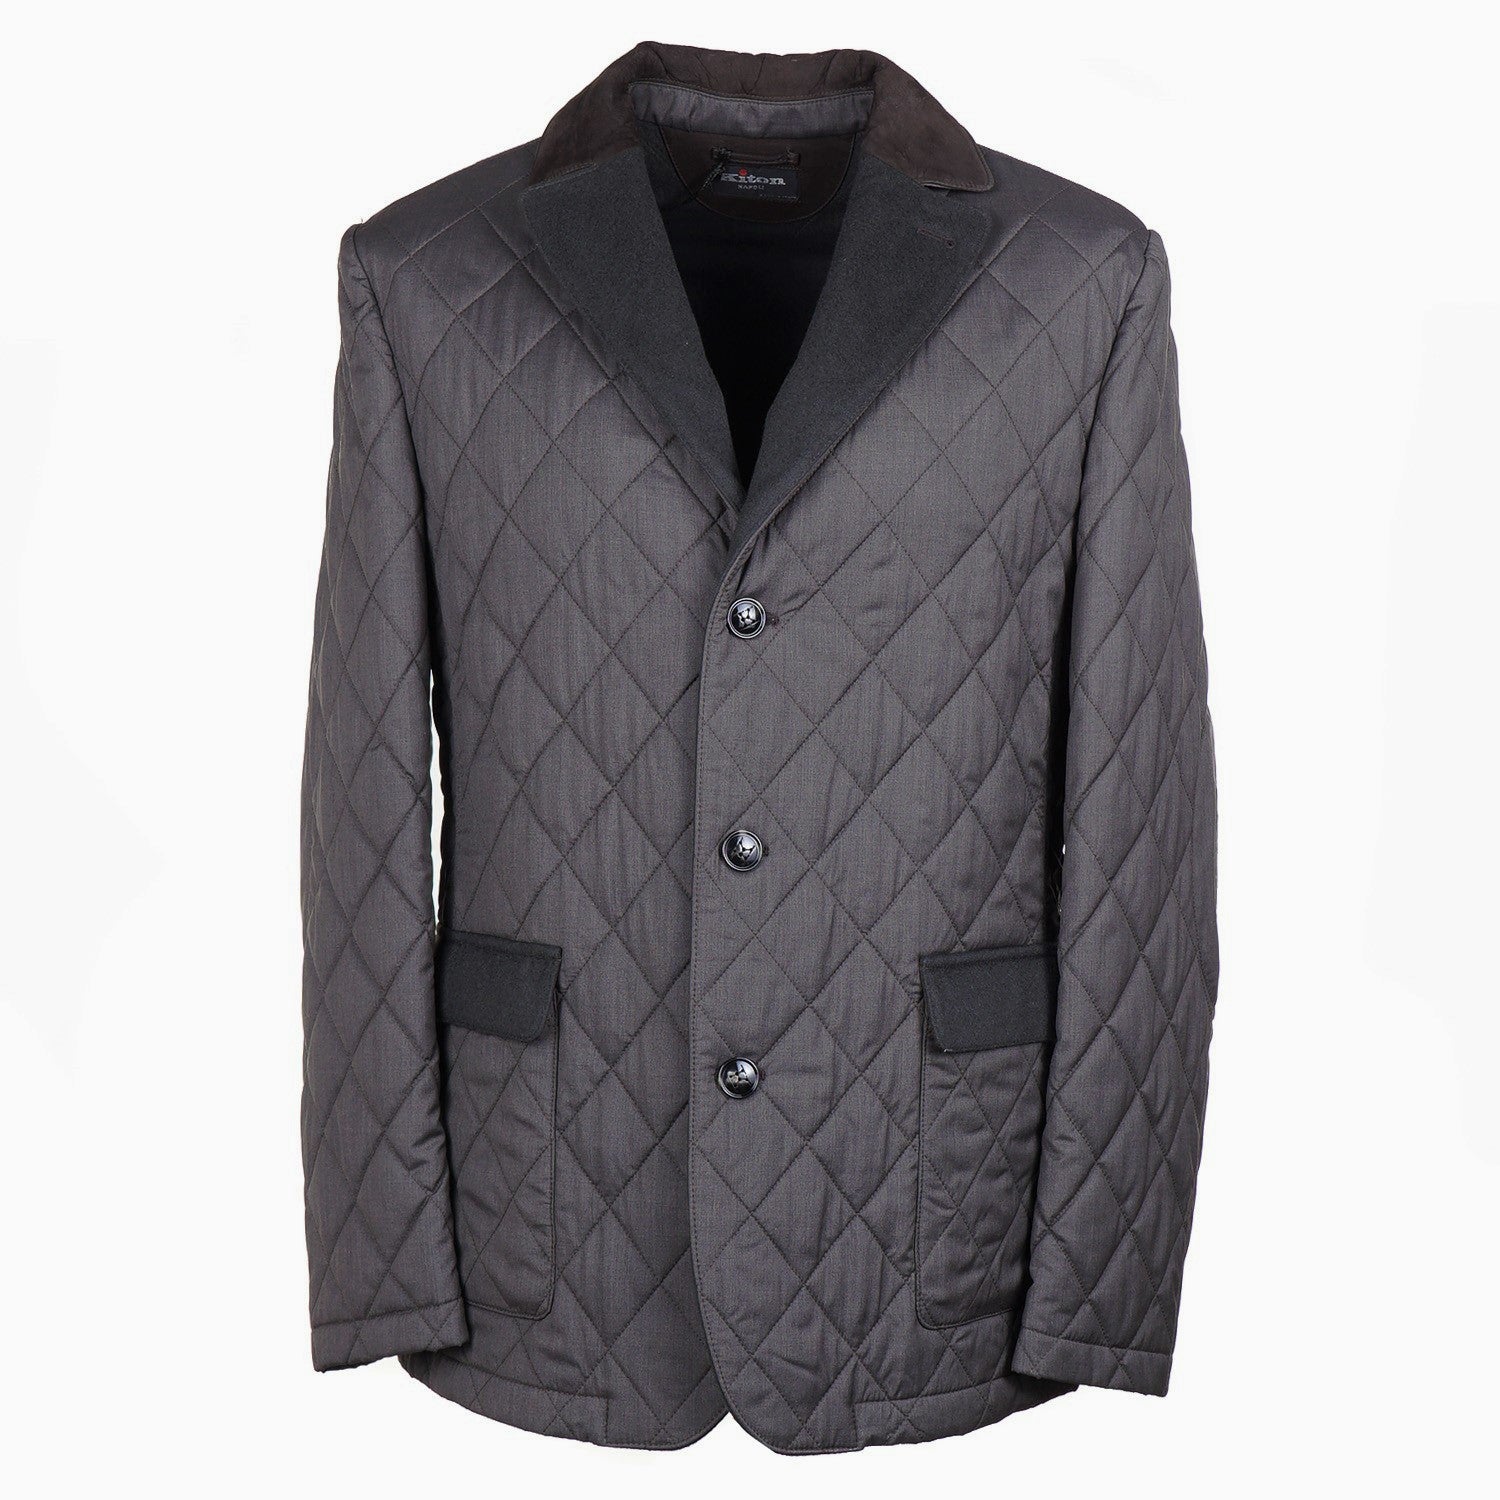 Kiton Quilted Jacket with Cashmere Lining - Top Shelf Apparel